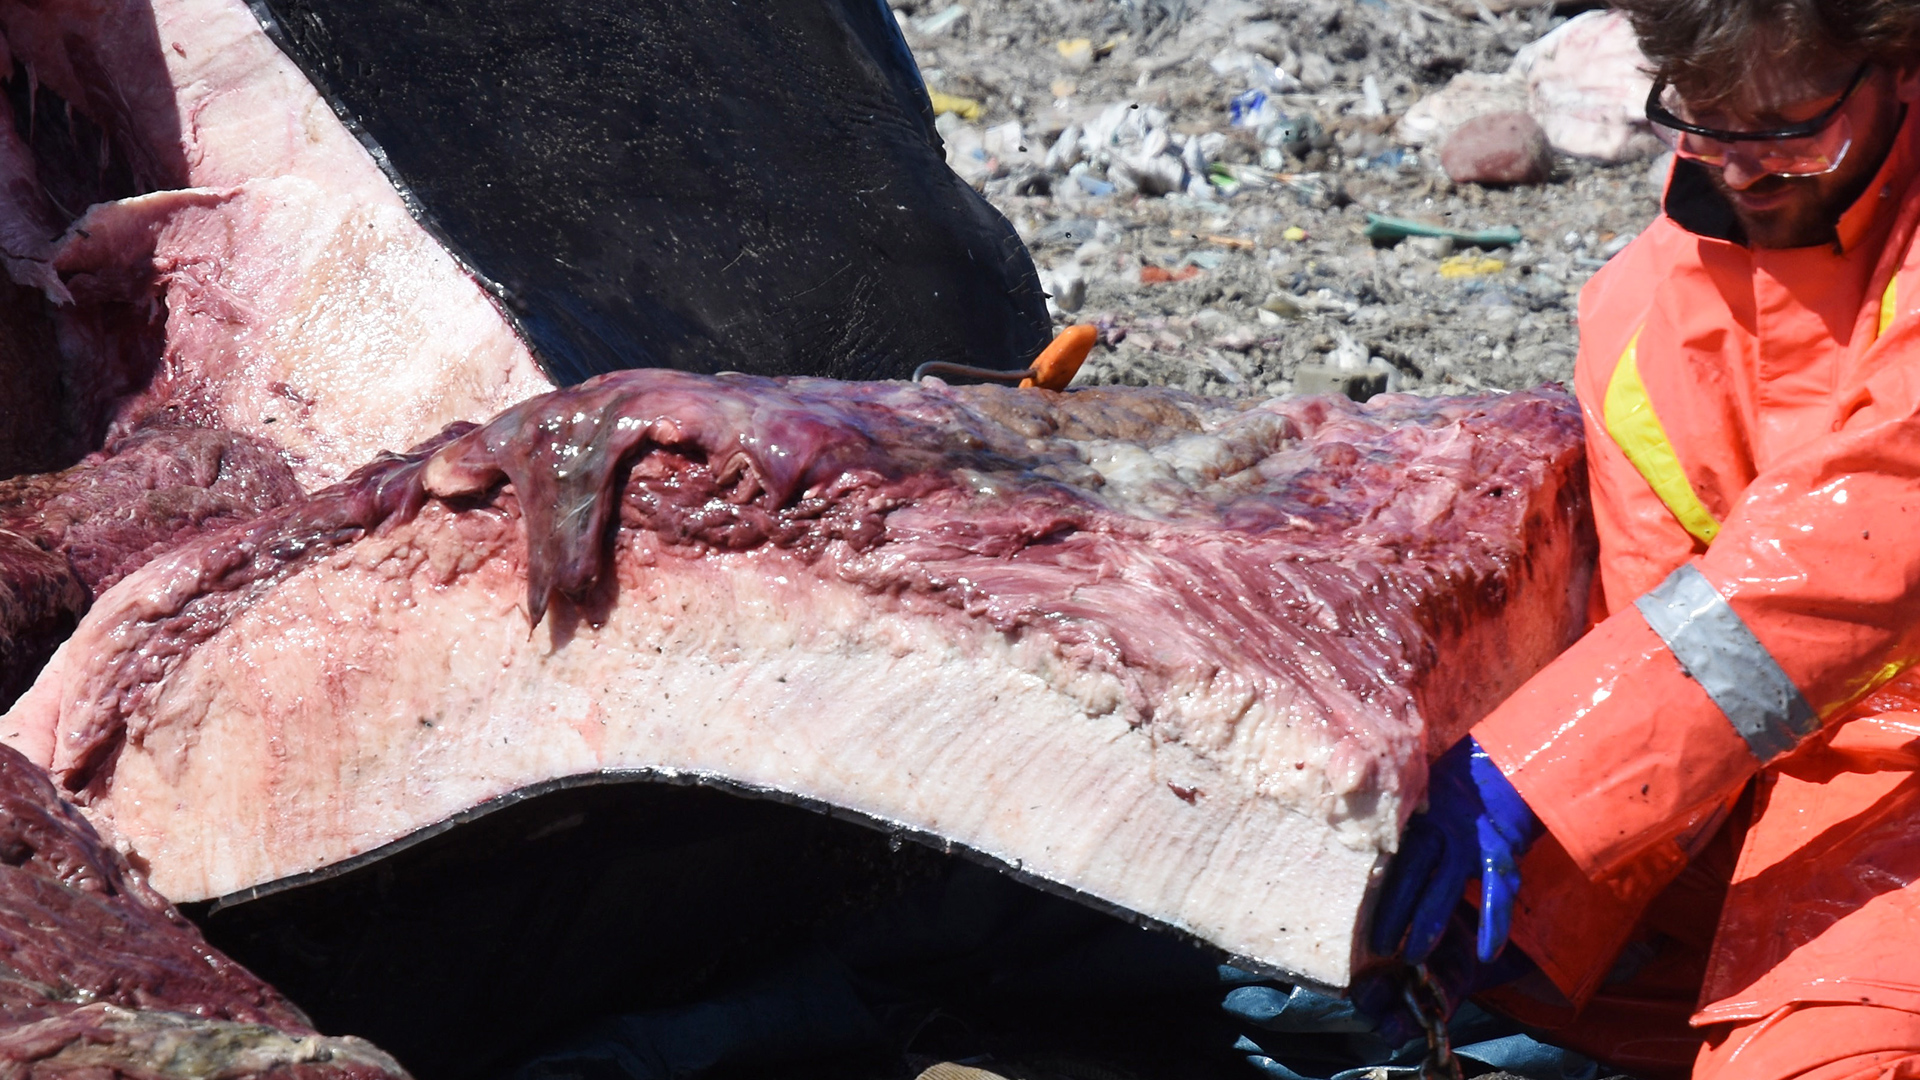 Slice of skin from a right whale carcass with its thick layer of blubber. A man standing next to it shows that the blubber is thicker than his hand is long.